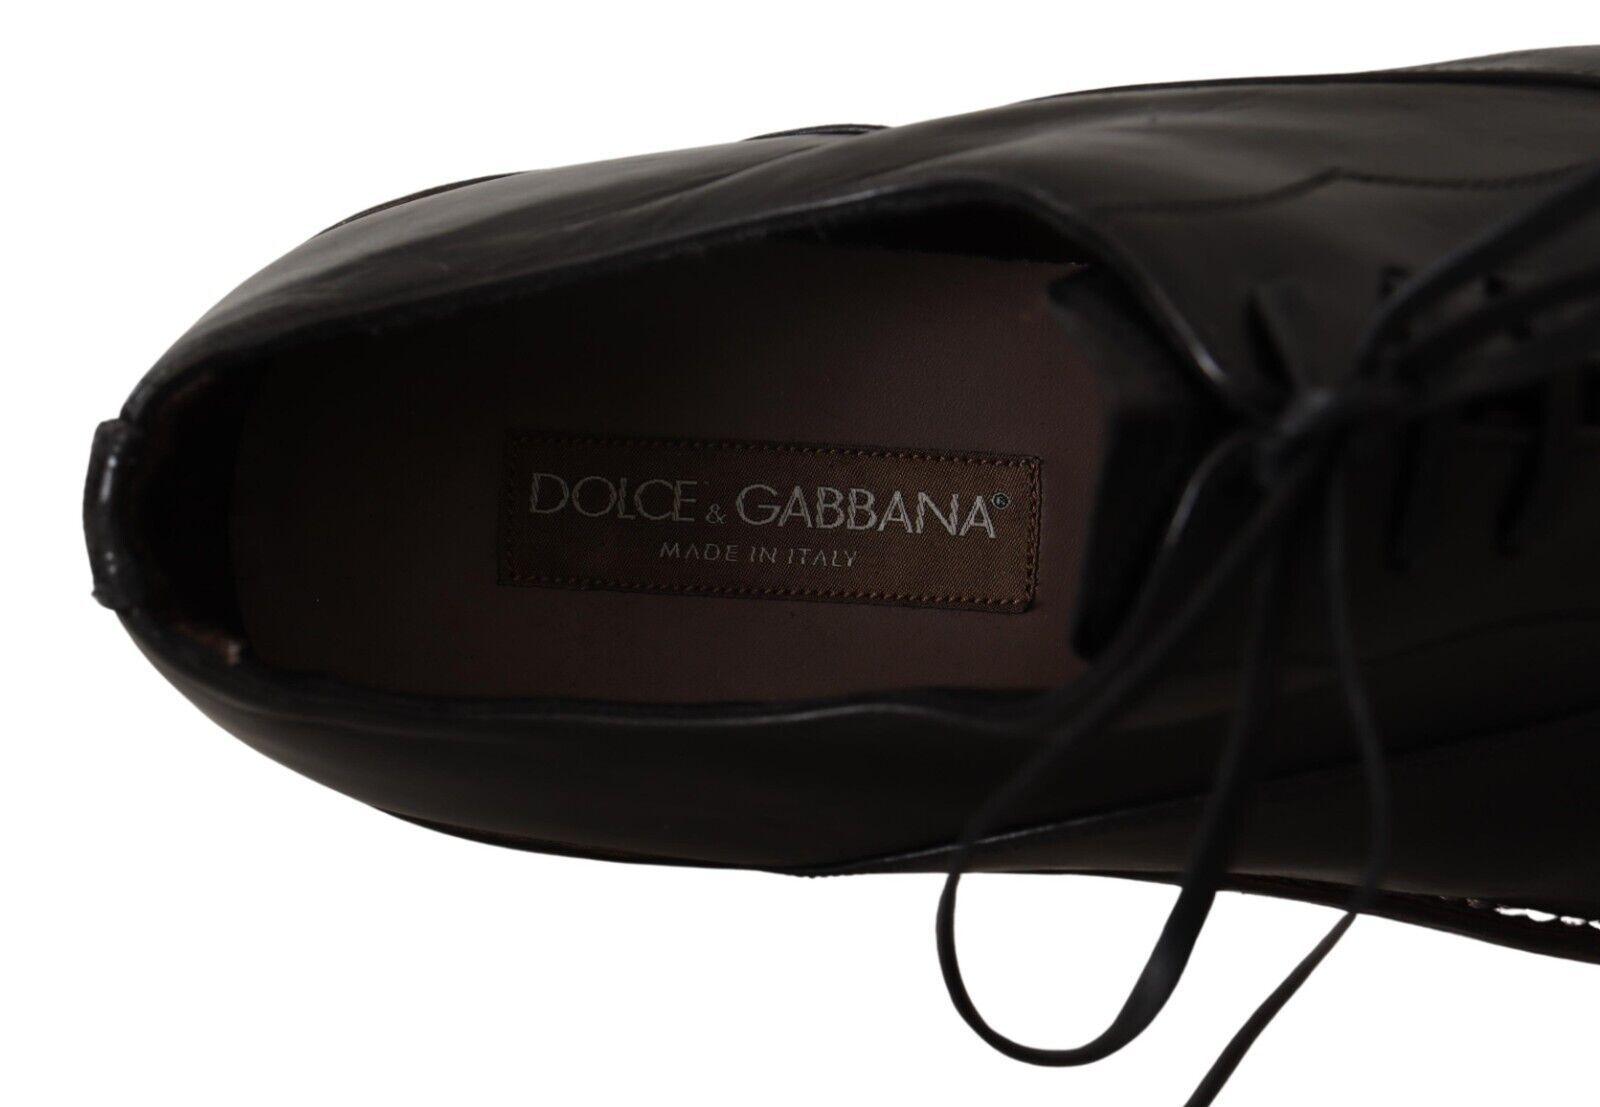 Black Leather Mens Lace Up Derby Shoes - Designed by Dolce & Gabbana Available to Buy at a Discounted Price on Moon Behind The Hill Online Designer Discount Store